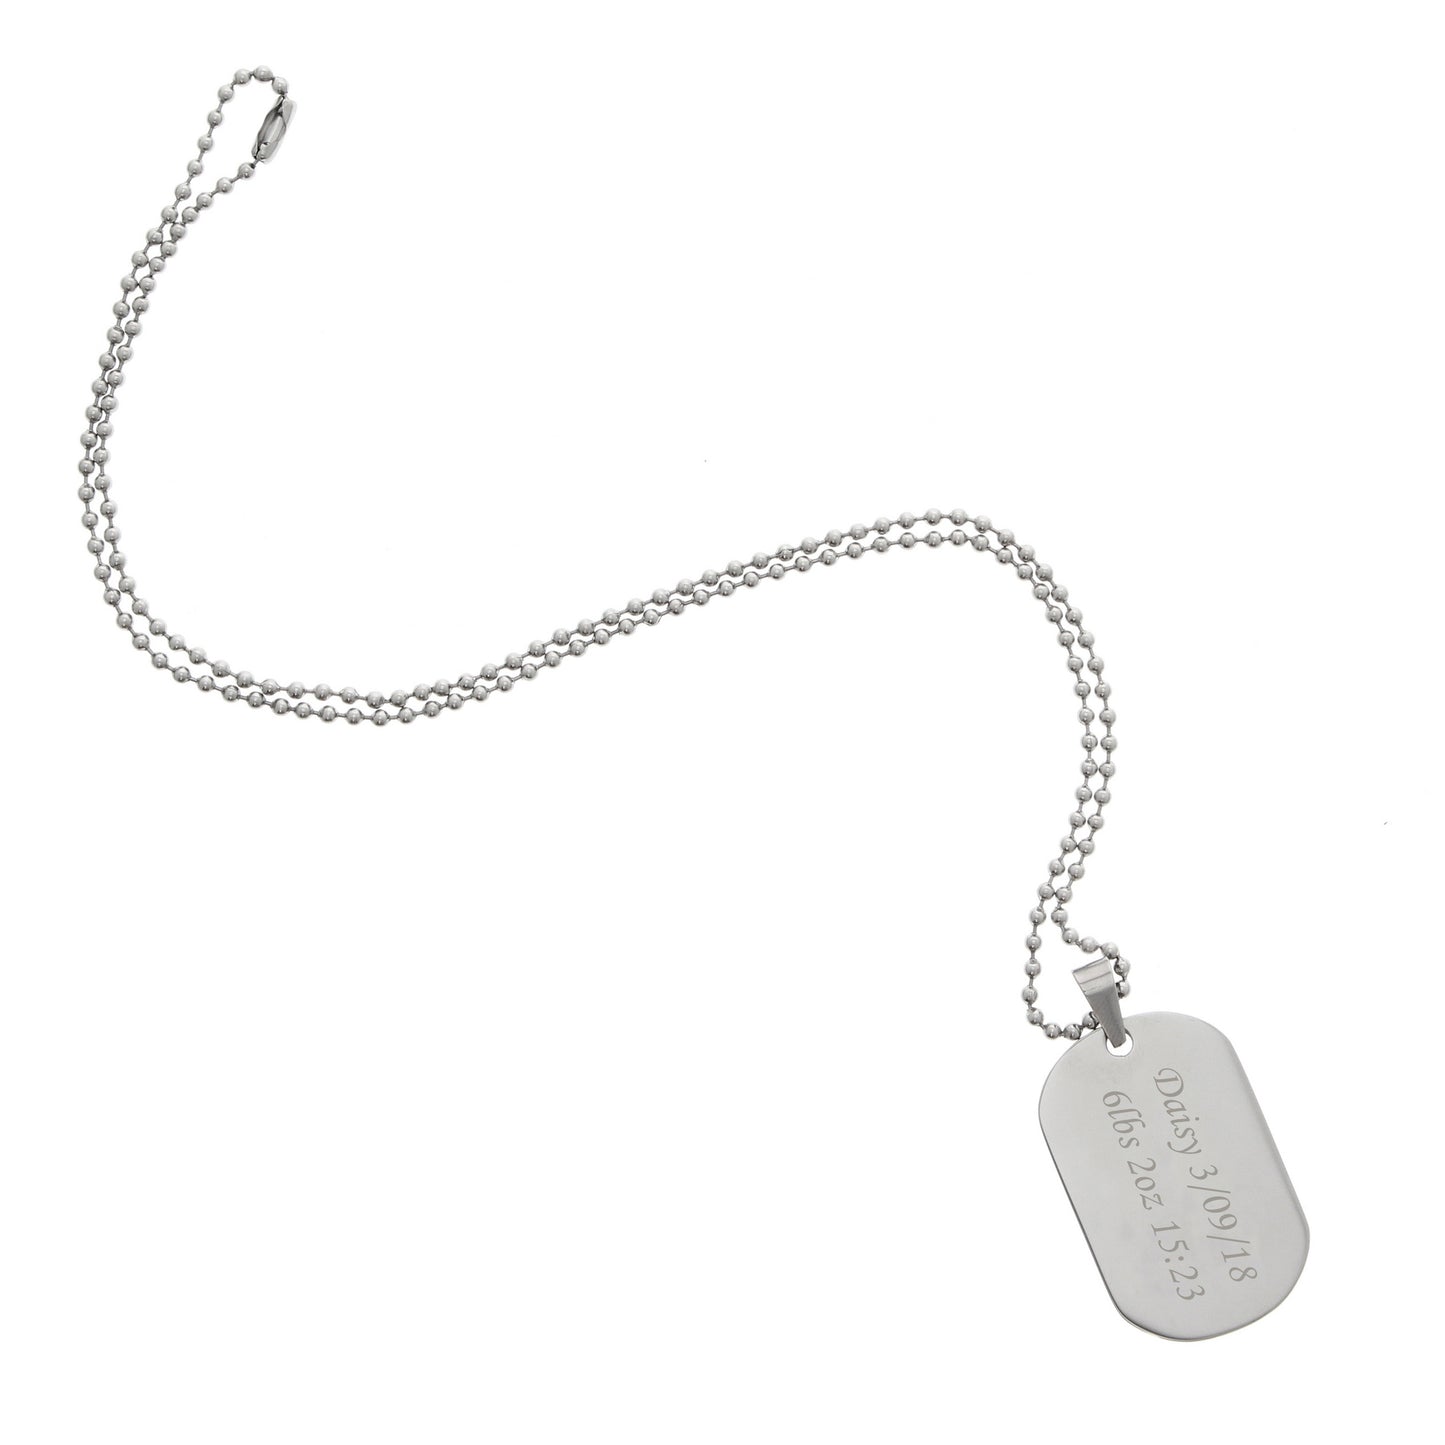 Personalised Stainless Steel Dog Tag Necklace - Personalise It!